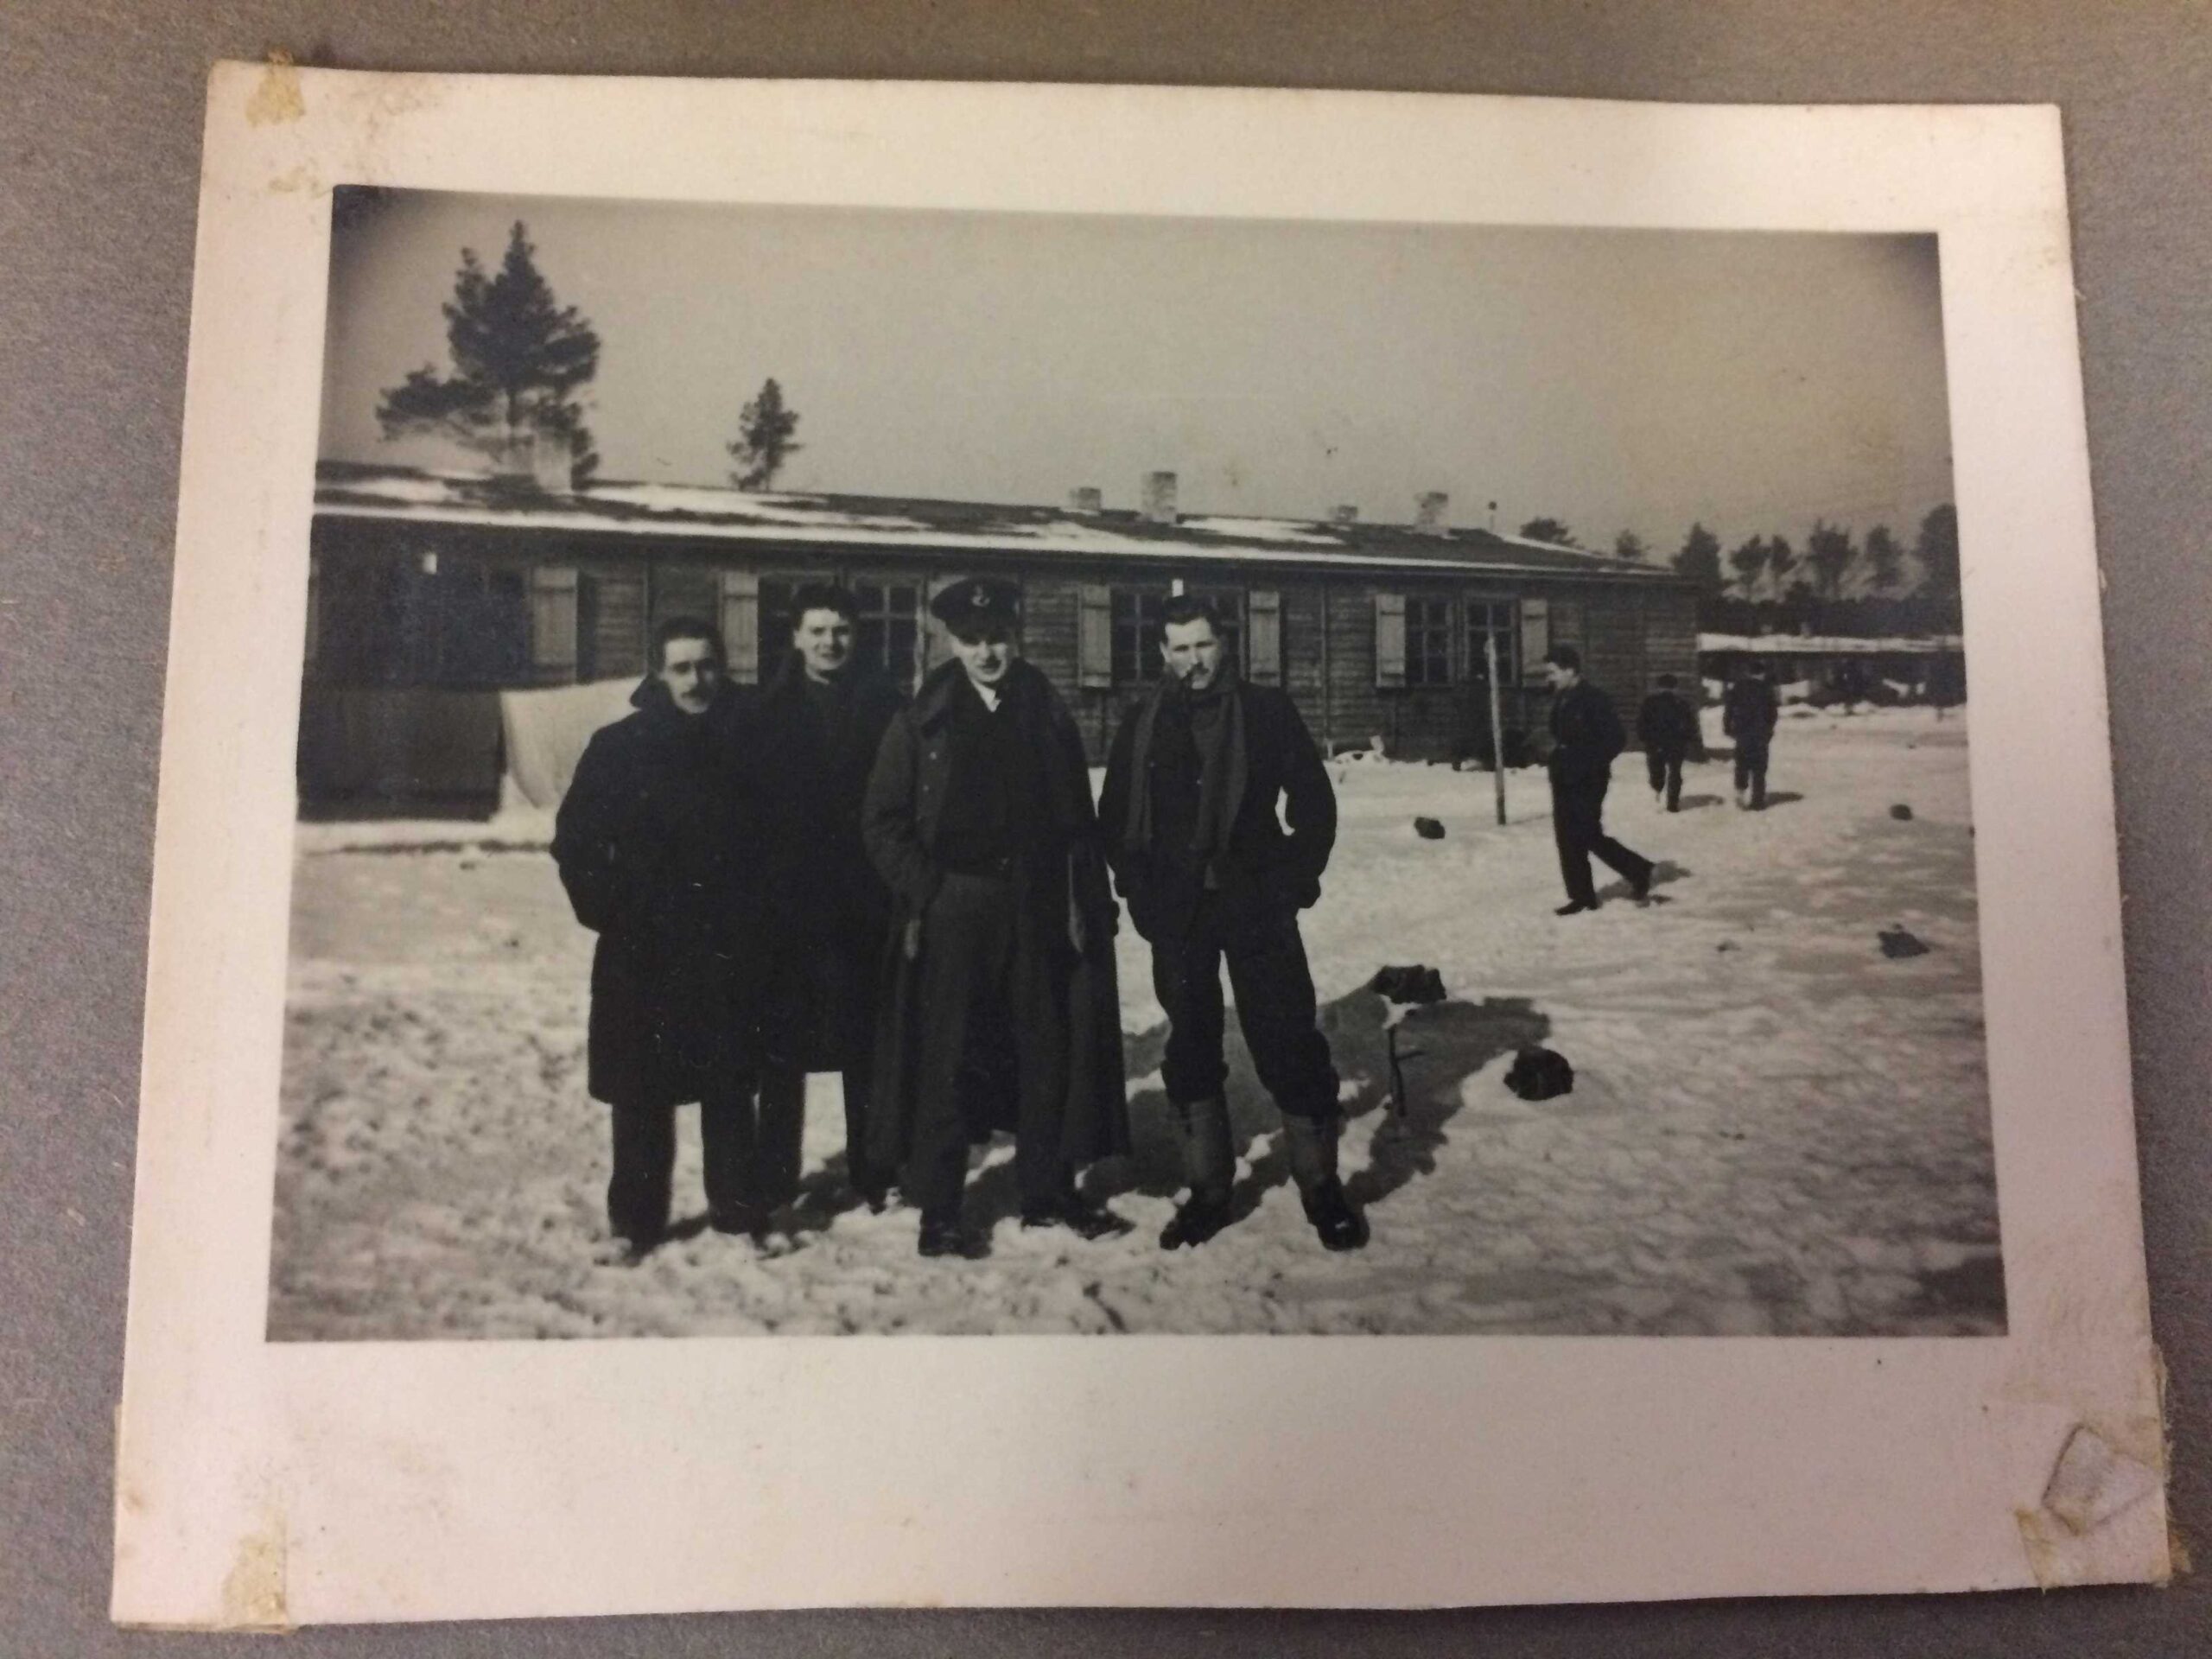 POWs in Stalag Luft - images sold with journal of RAF Flight Lieutenant Viv Phillips, an inmate of Stalag Luft III - SOLD for £13,500 at Hansons Auctioneers in 2019